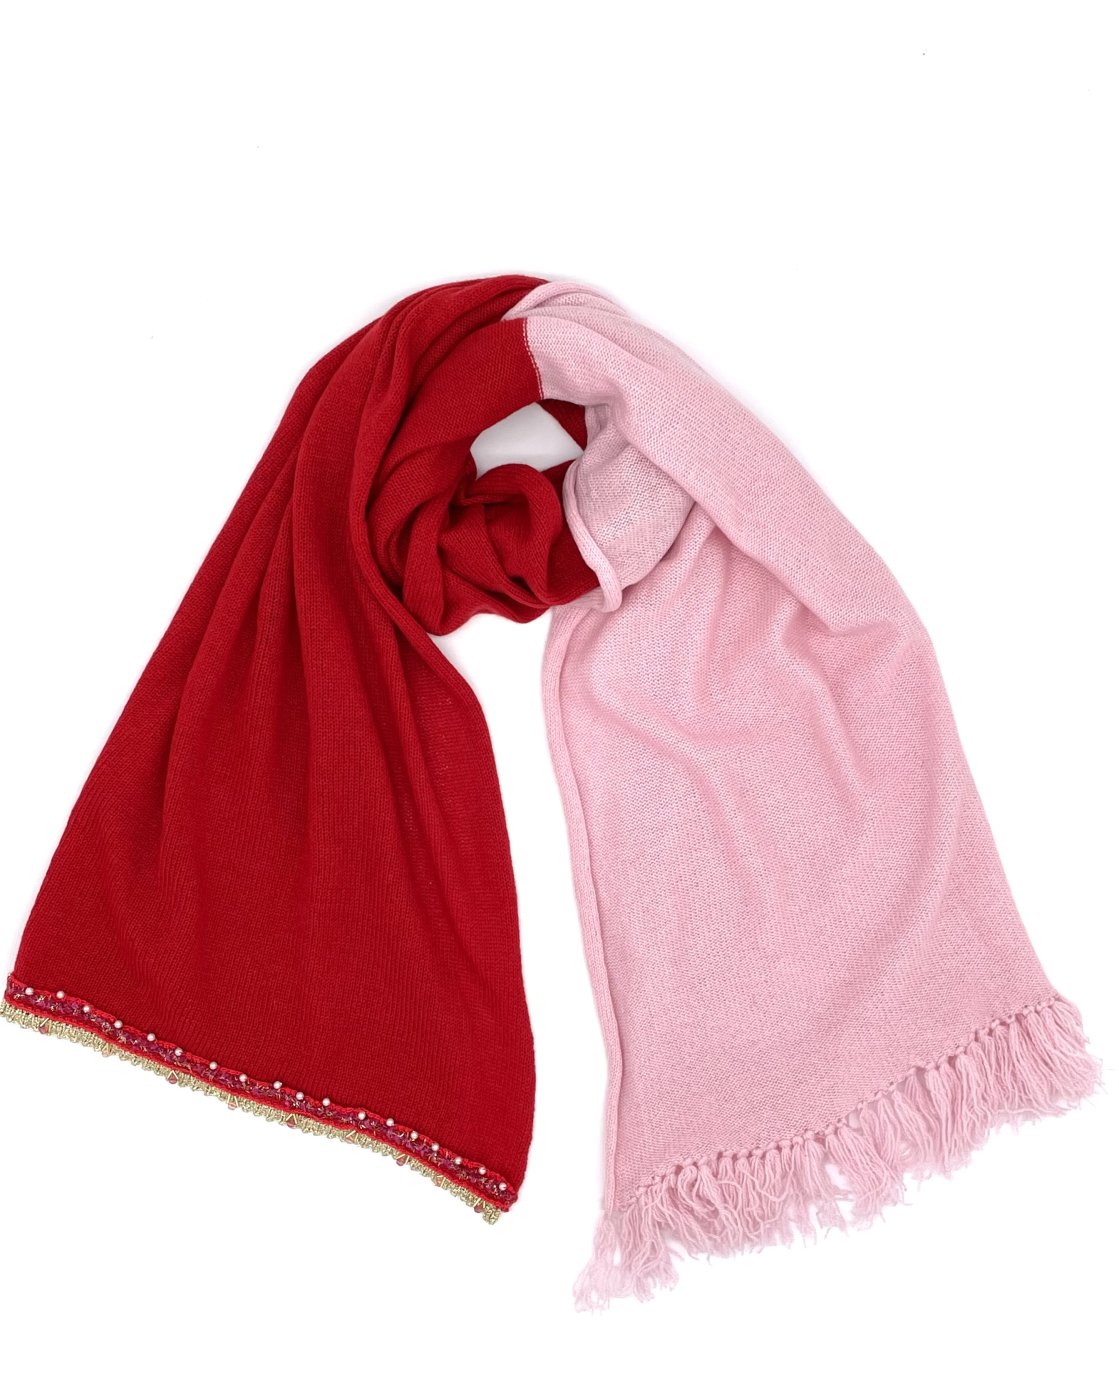 leur logette - Cashmere Stall - Pink x Red